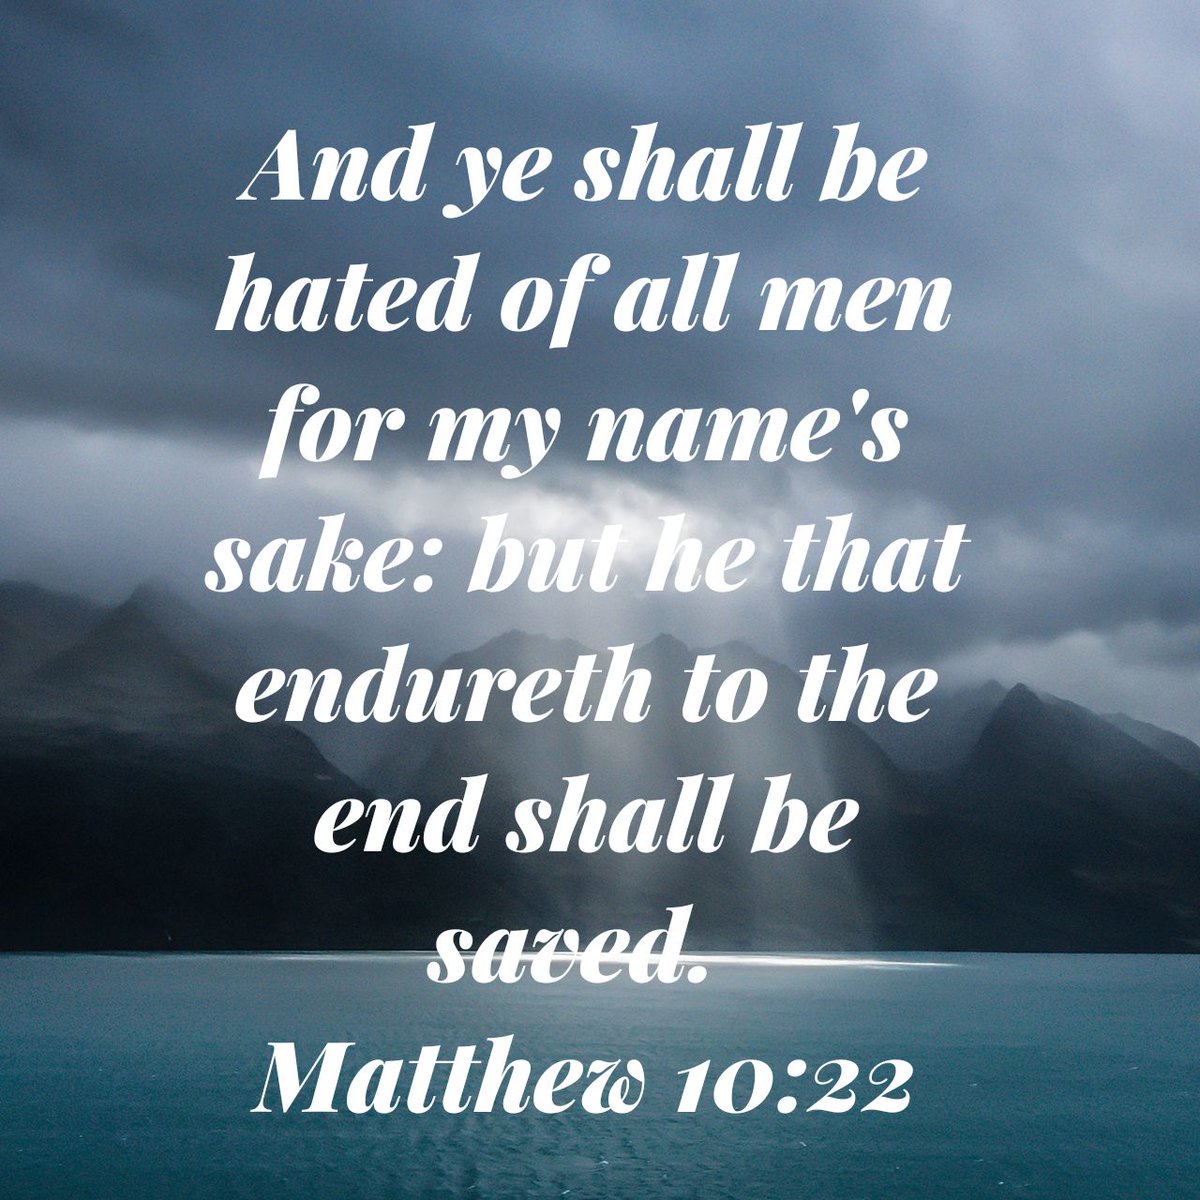 And ye shall be hated of all men for my name's sake: but he that endureth to the end shall be saved.
Matthew 10:22